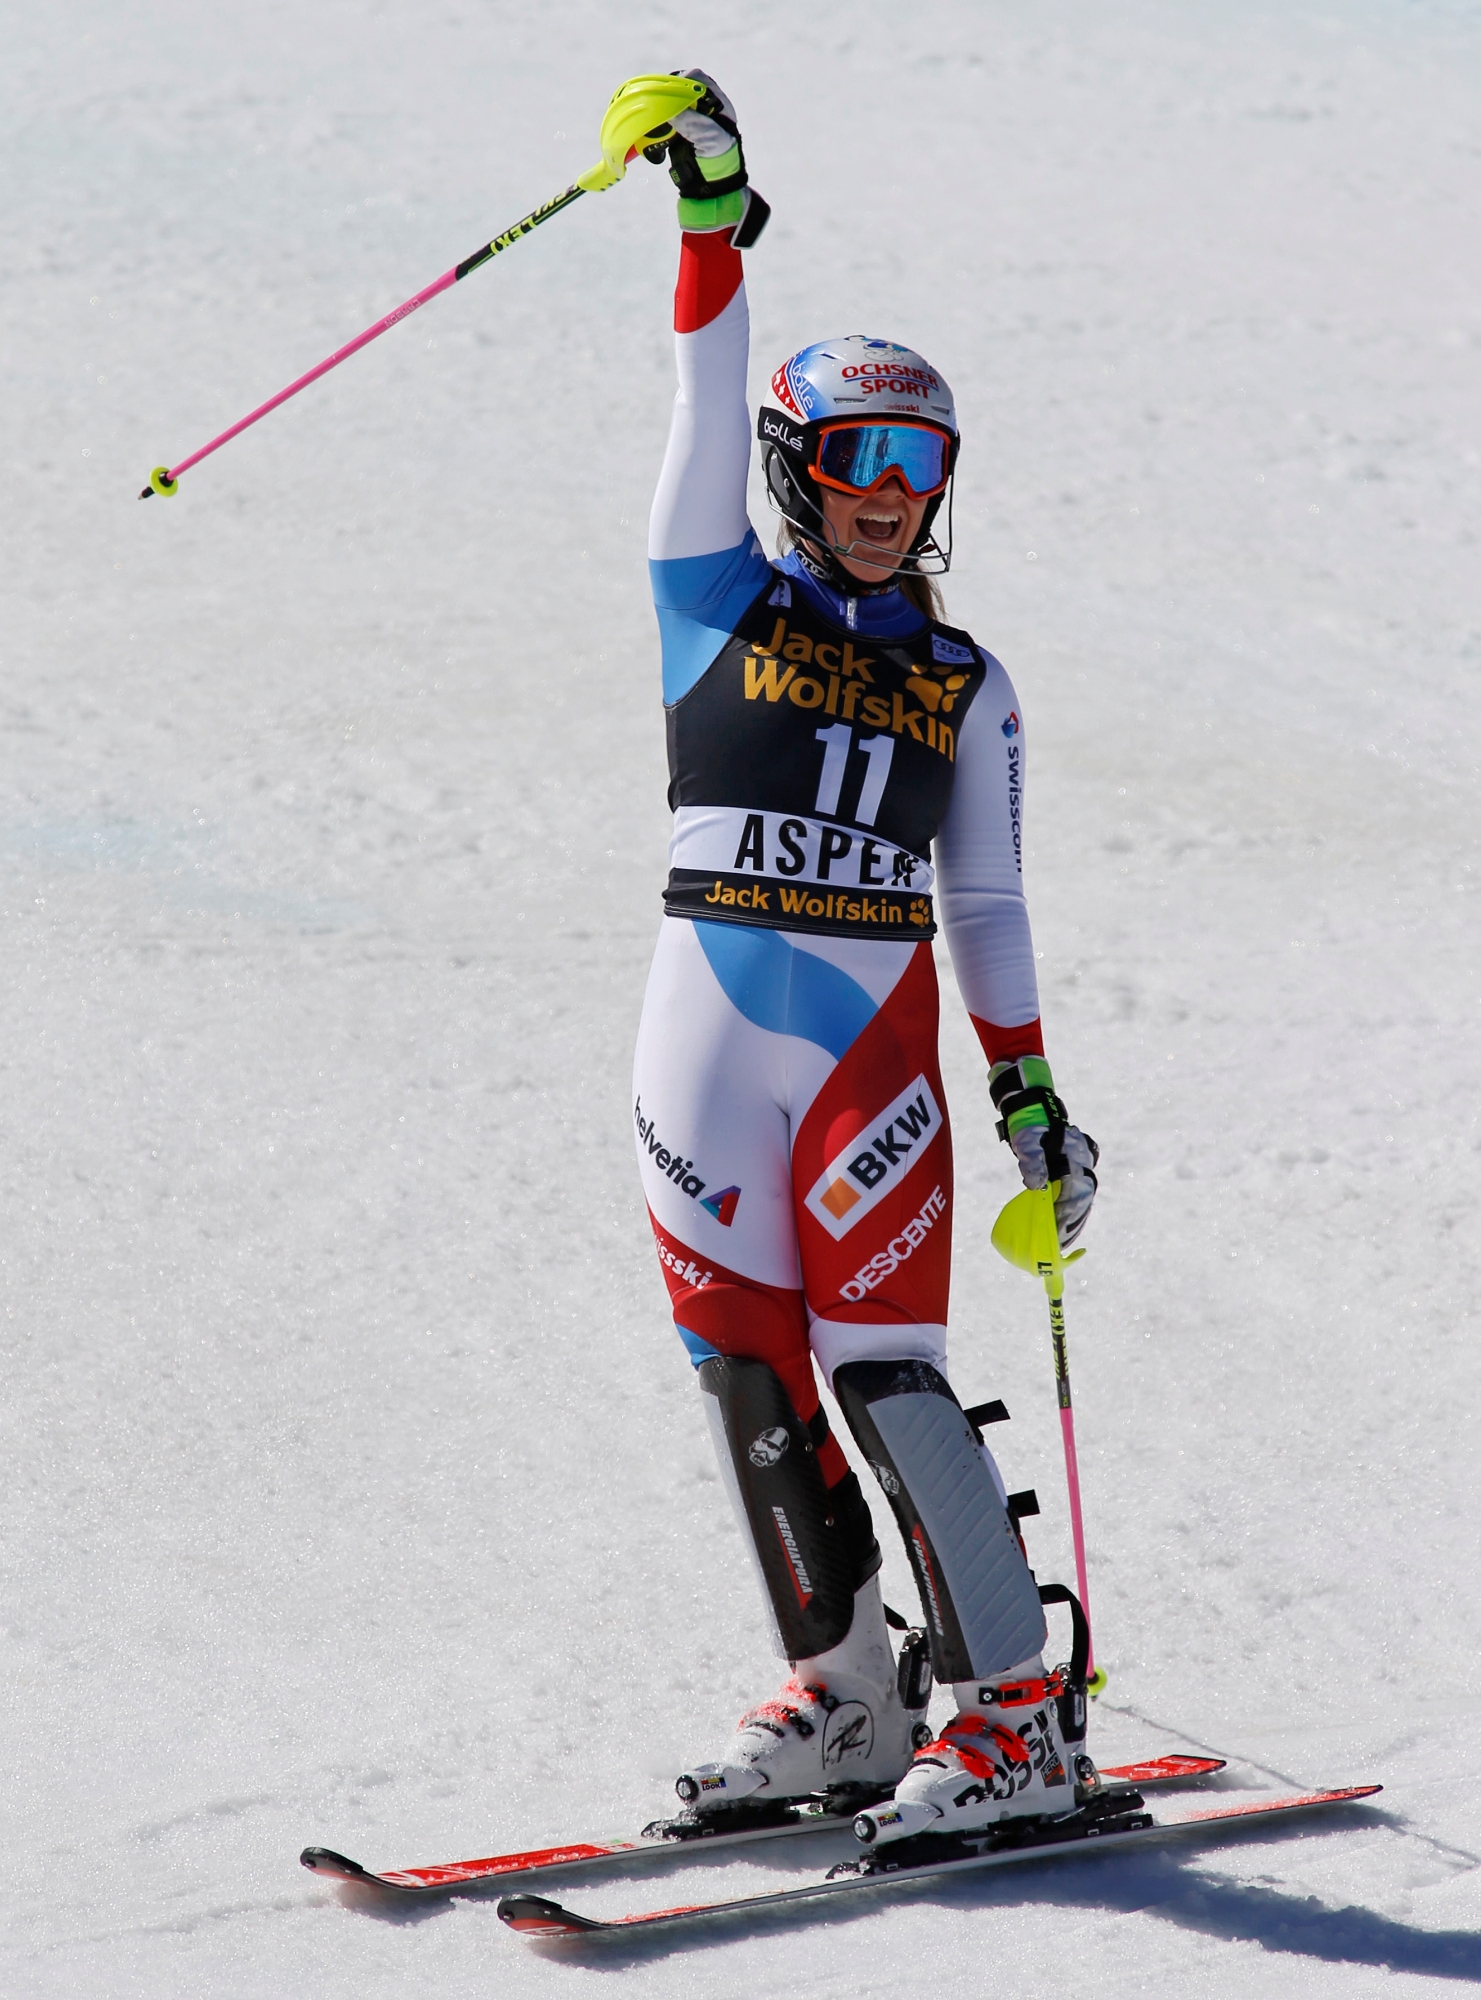 Switzerland's Melanie Meillard celebrates after the second run of a women's World Cup slalom ski race Saturday, March 18, 2017, in Aspen, Colo. (AP Photo/Nathan Bilow) WCup Womens Slalom Skiing